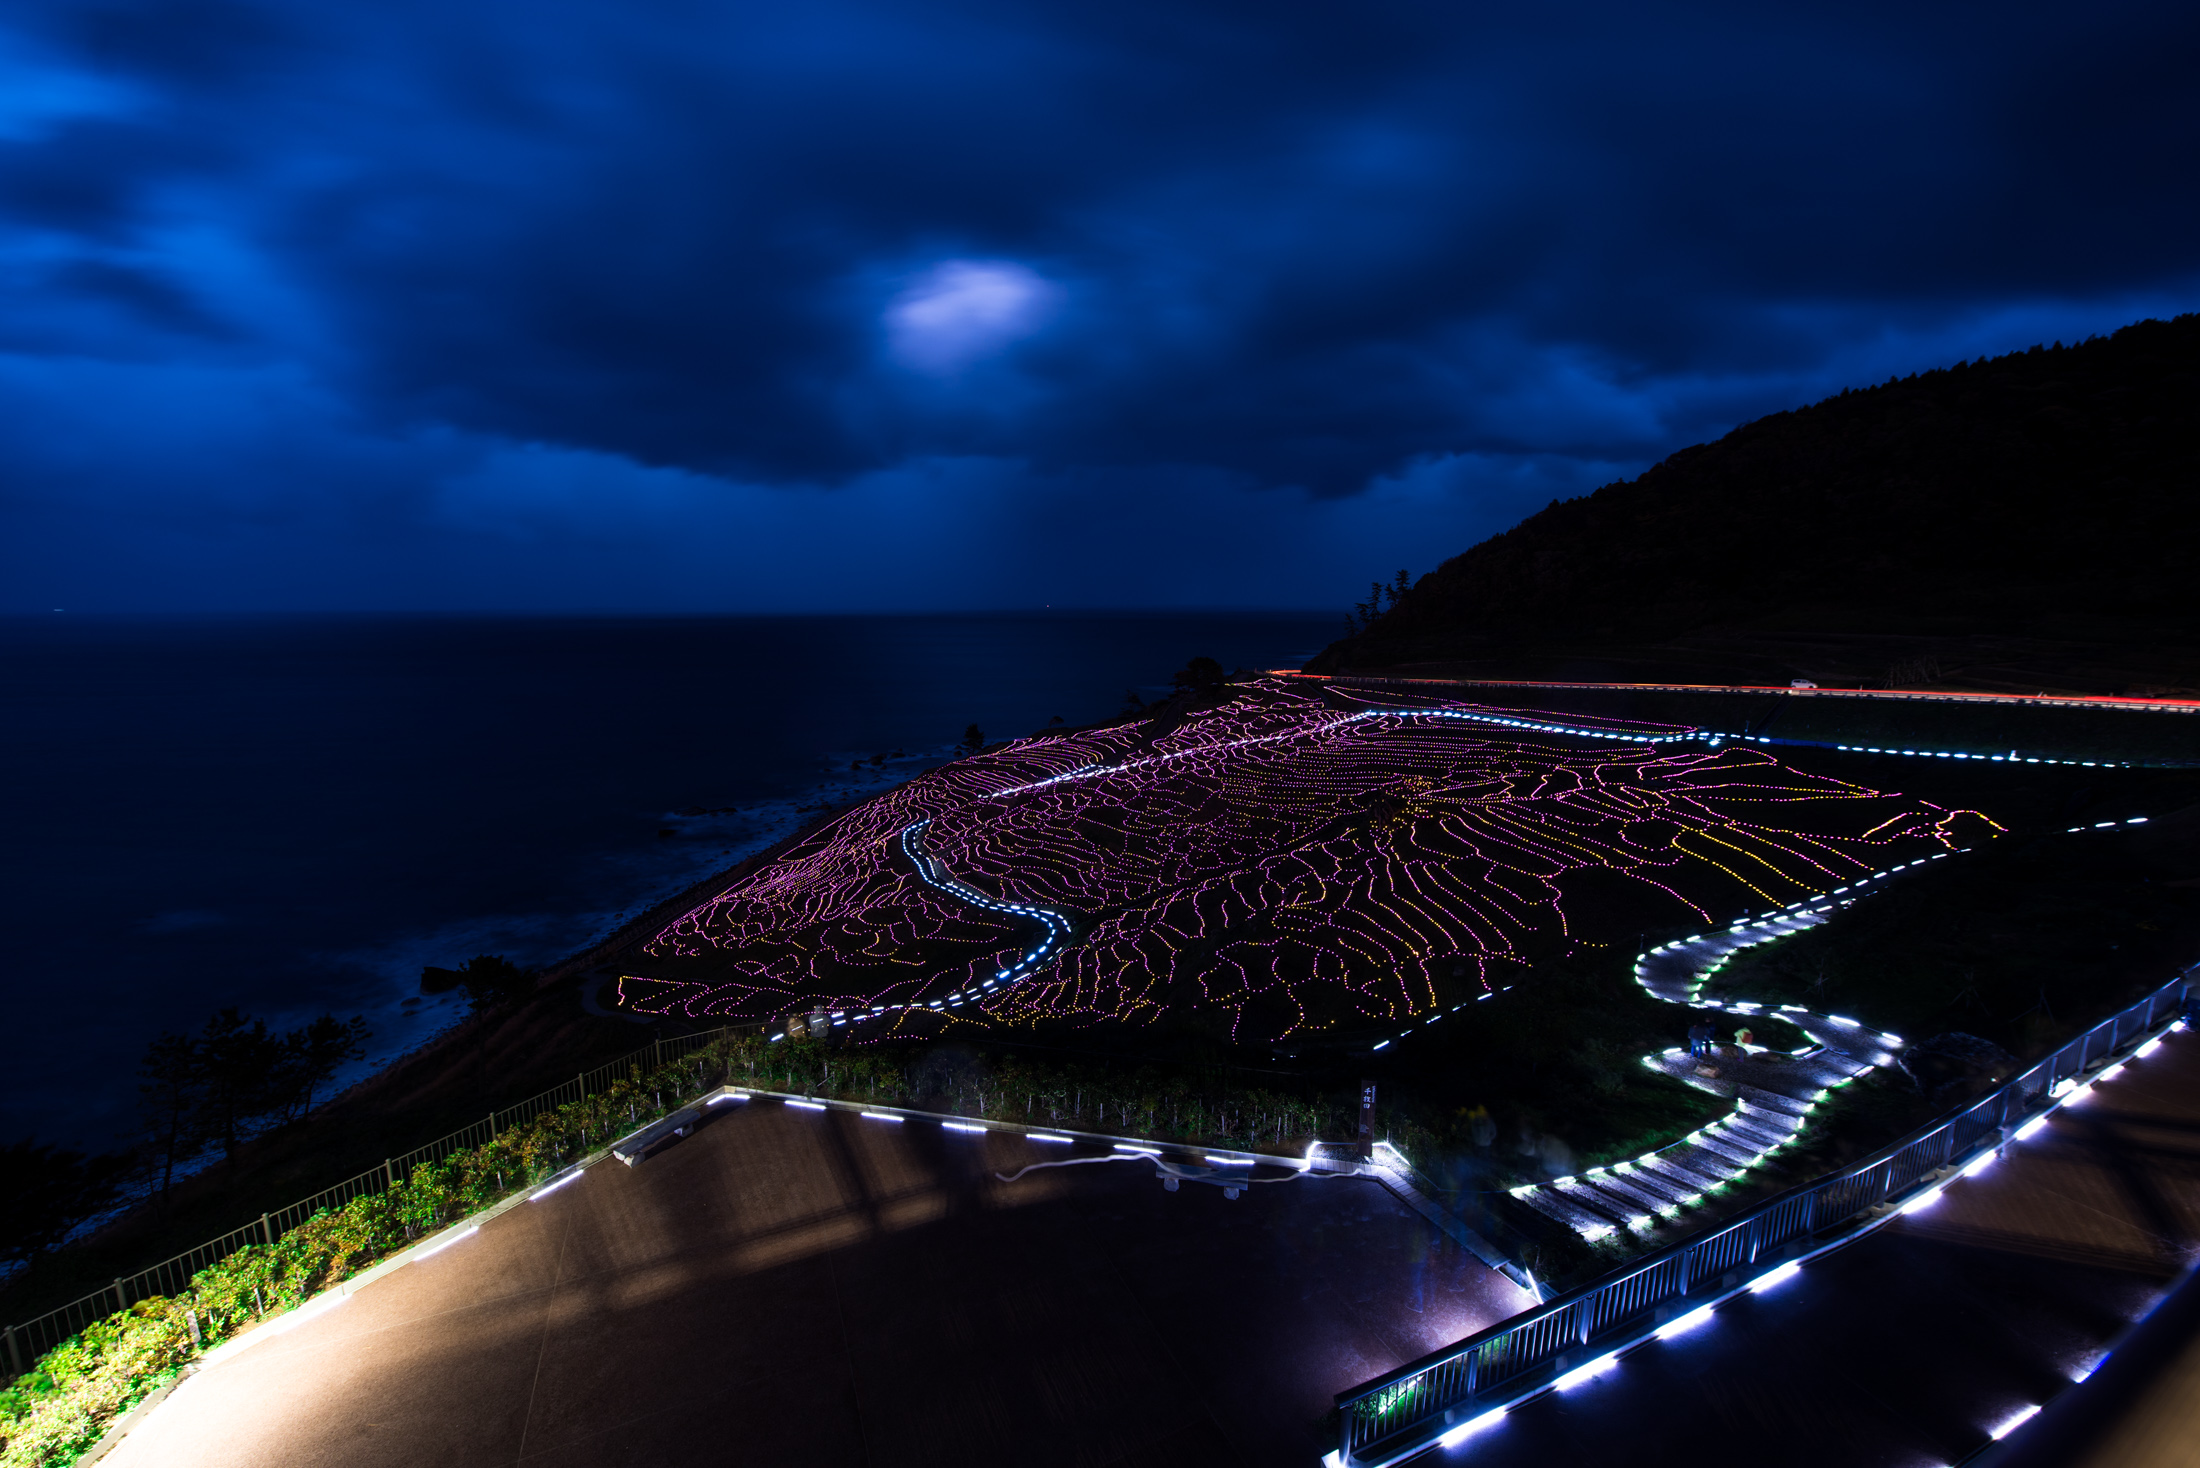 Enchanting illuminated rice fields in Japan with mesmerizing LED lights against the sea.